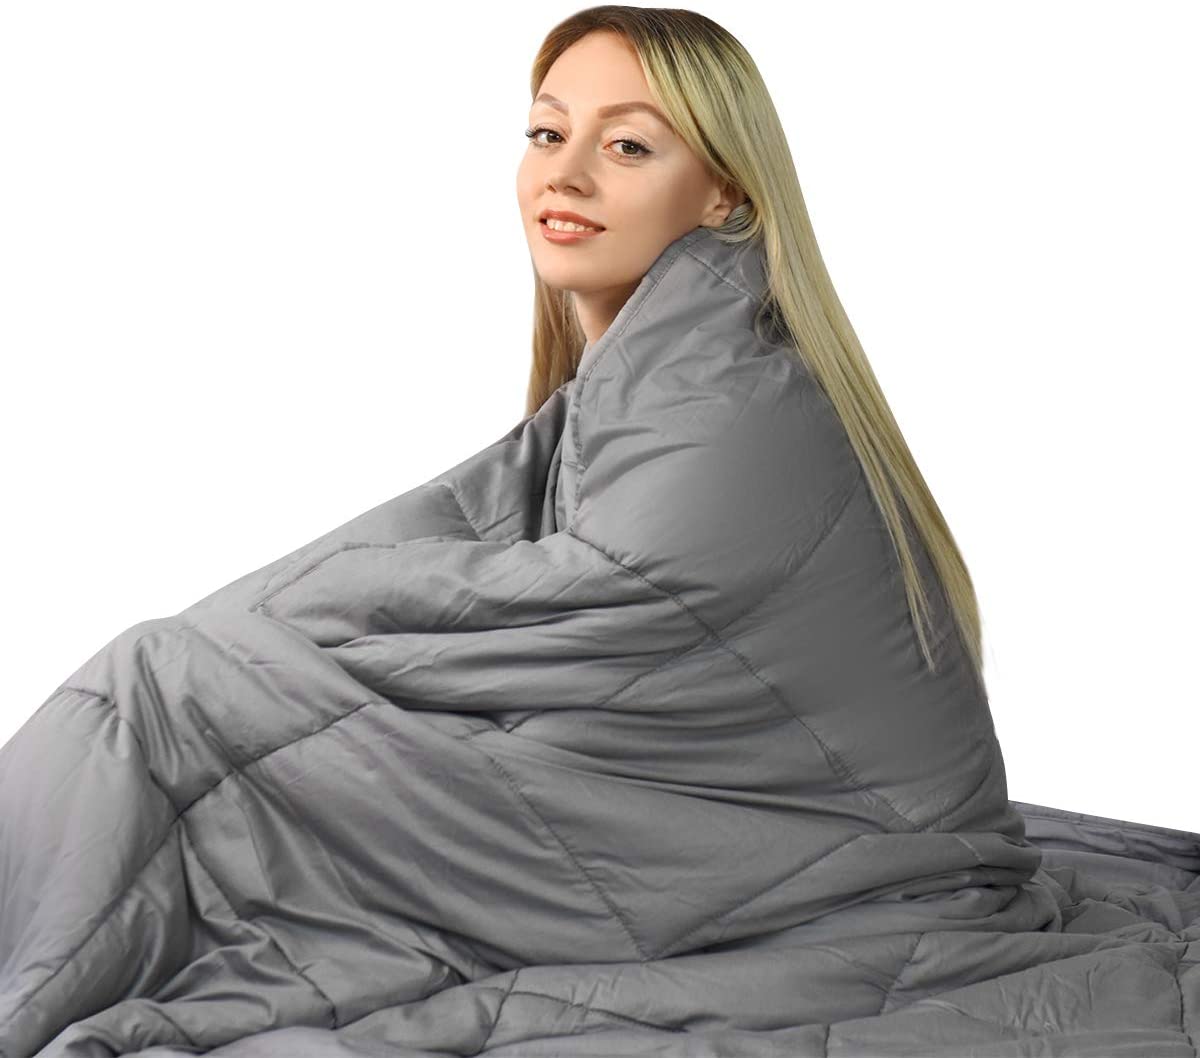 Weighted Blanket 20lbs |60"x80"| Queen Size